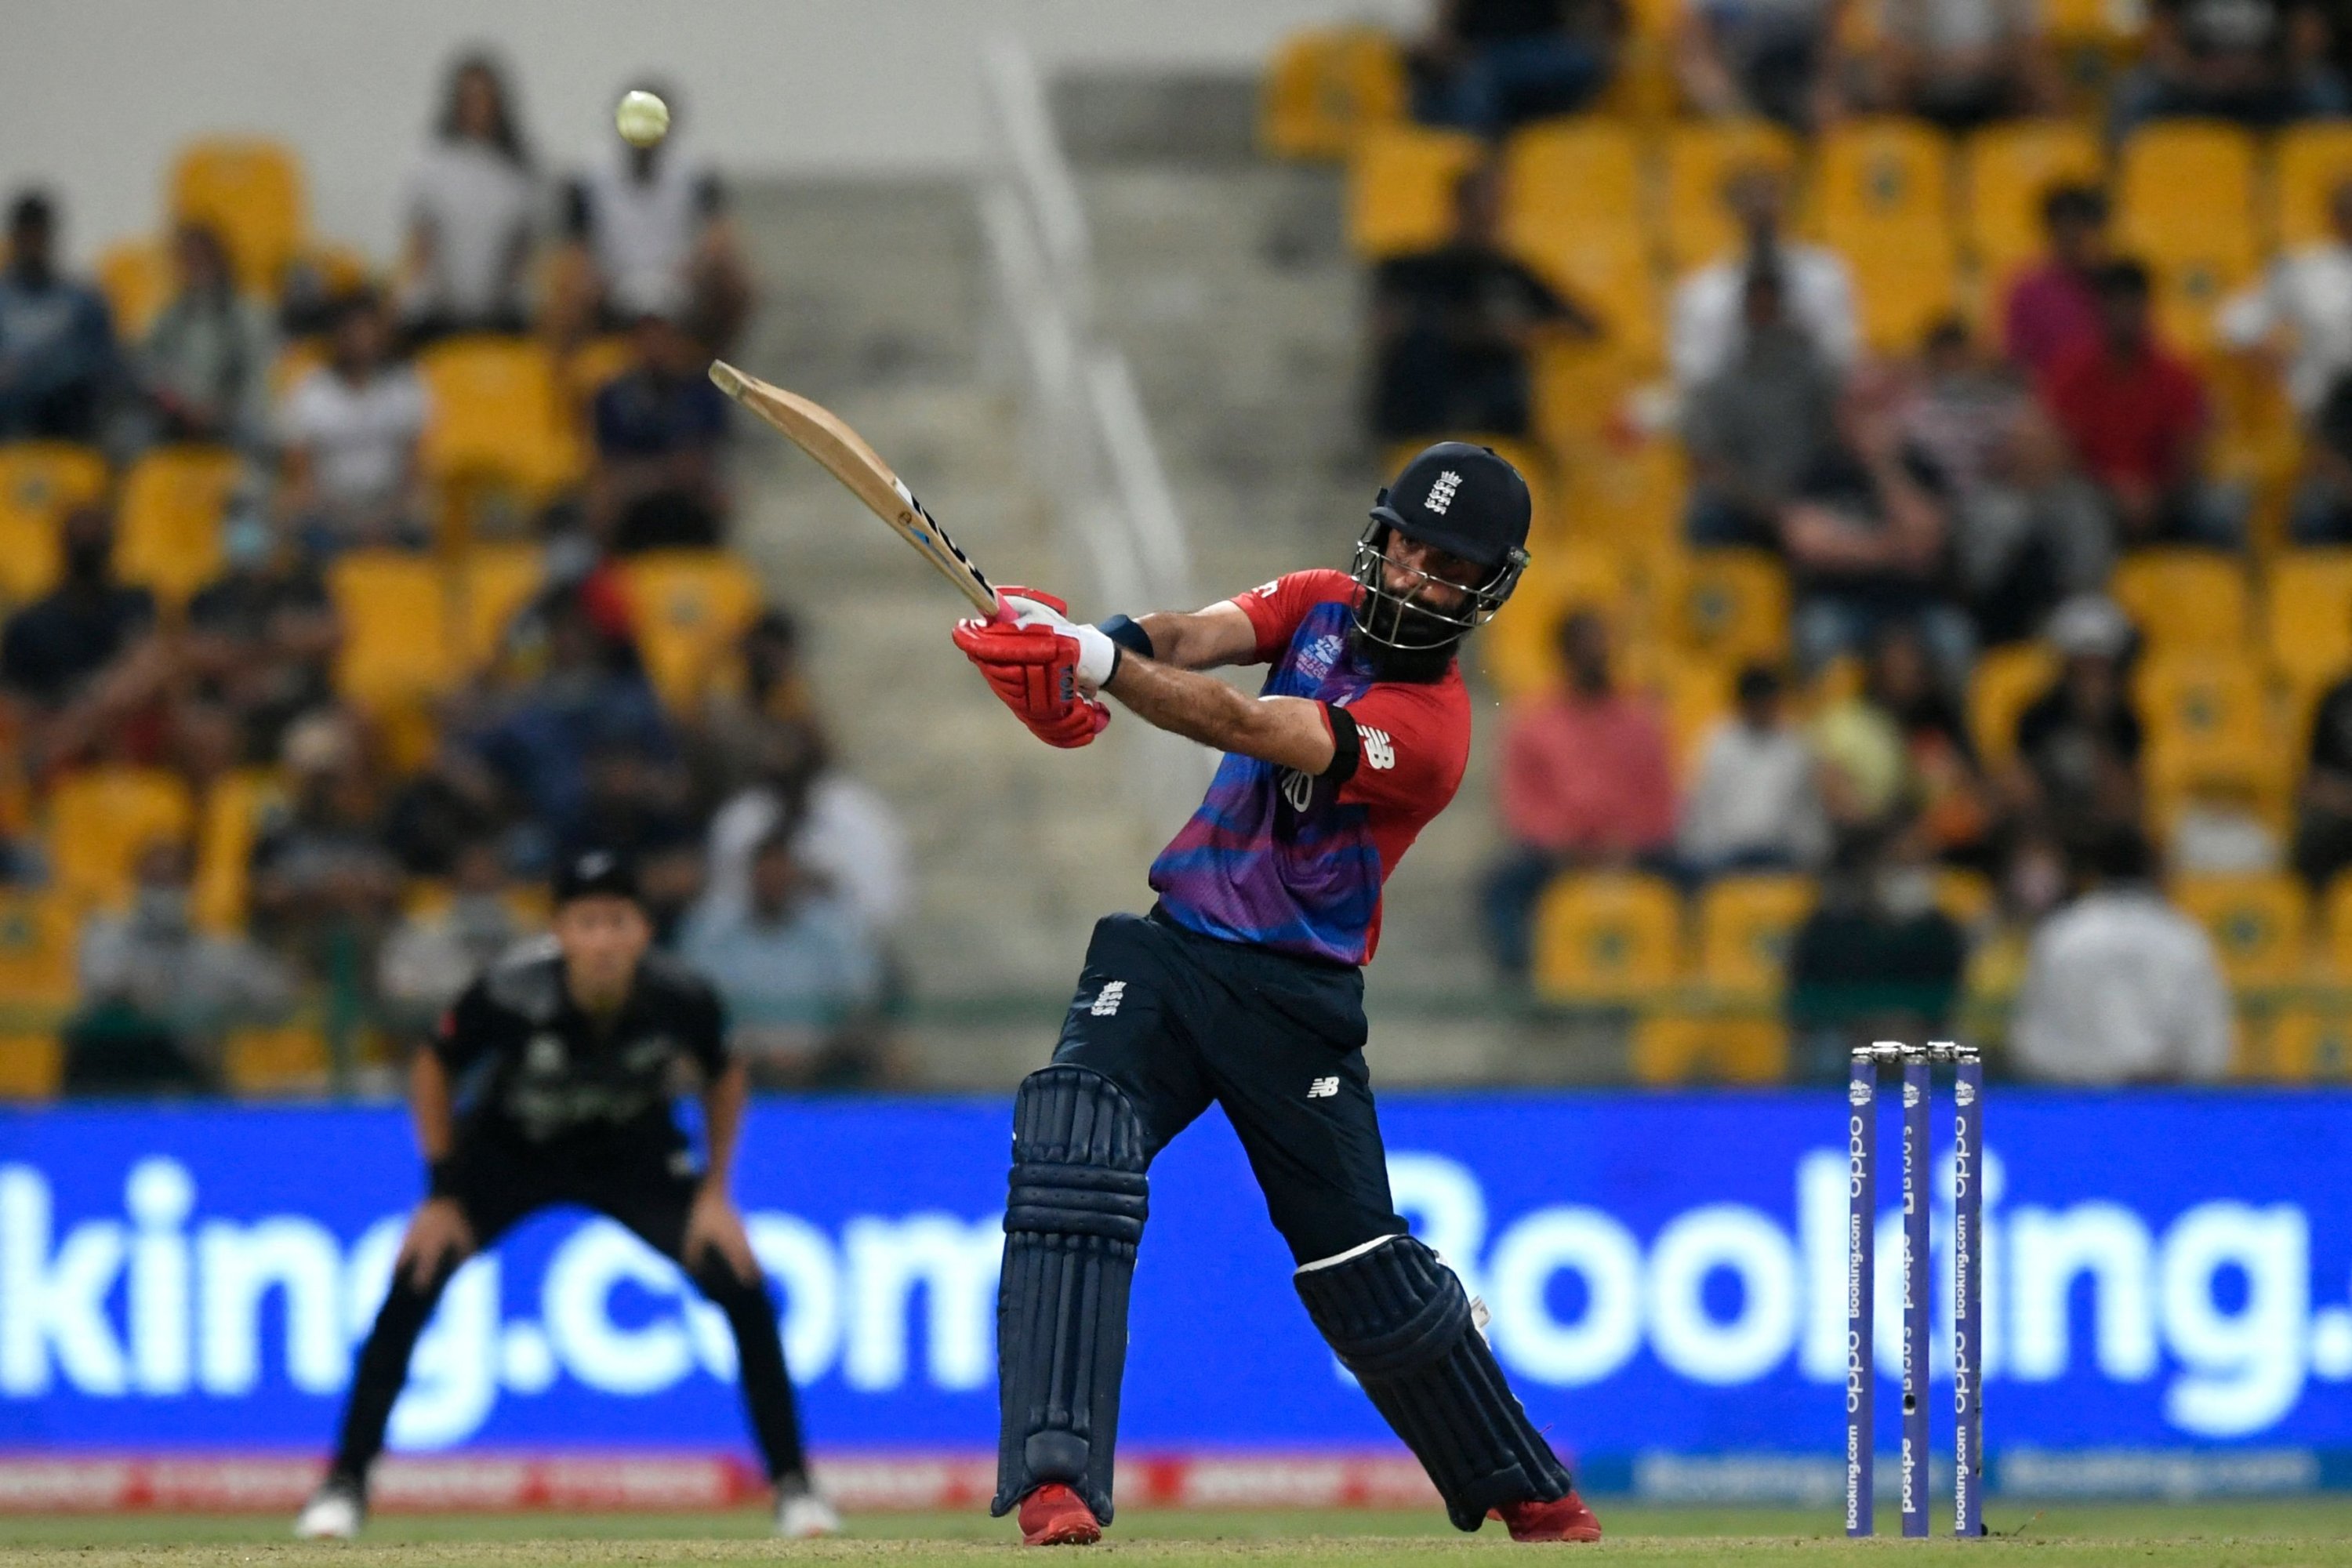 England's Moeen Ali plays a shot during the ICC men痴 Twenty20 World Cup semi-final match between England and New Zealand at the Sheikh Zayed Cricket Stadium in Abu Dhabi on November 10, 2021. (Photo by Aamir QURESHI / AFP)